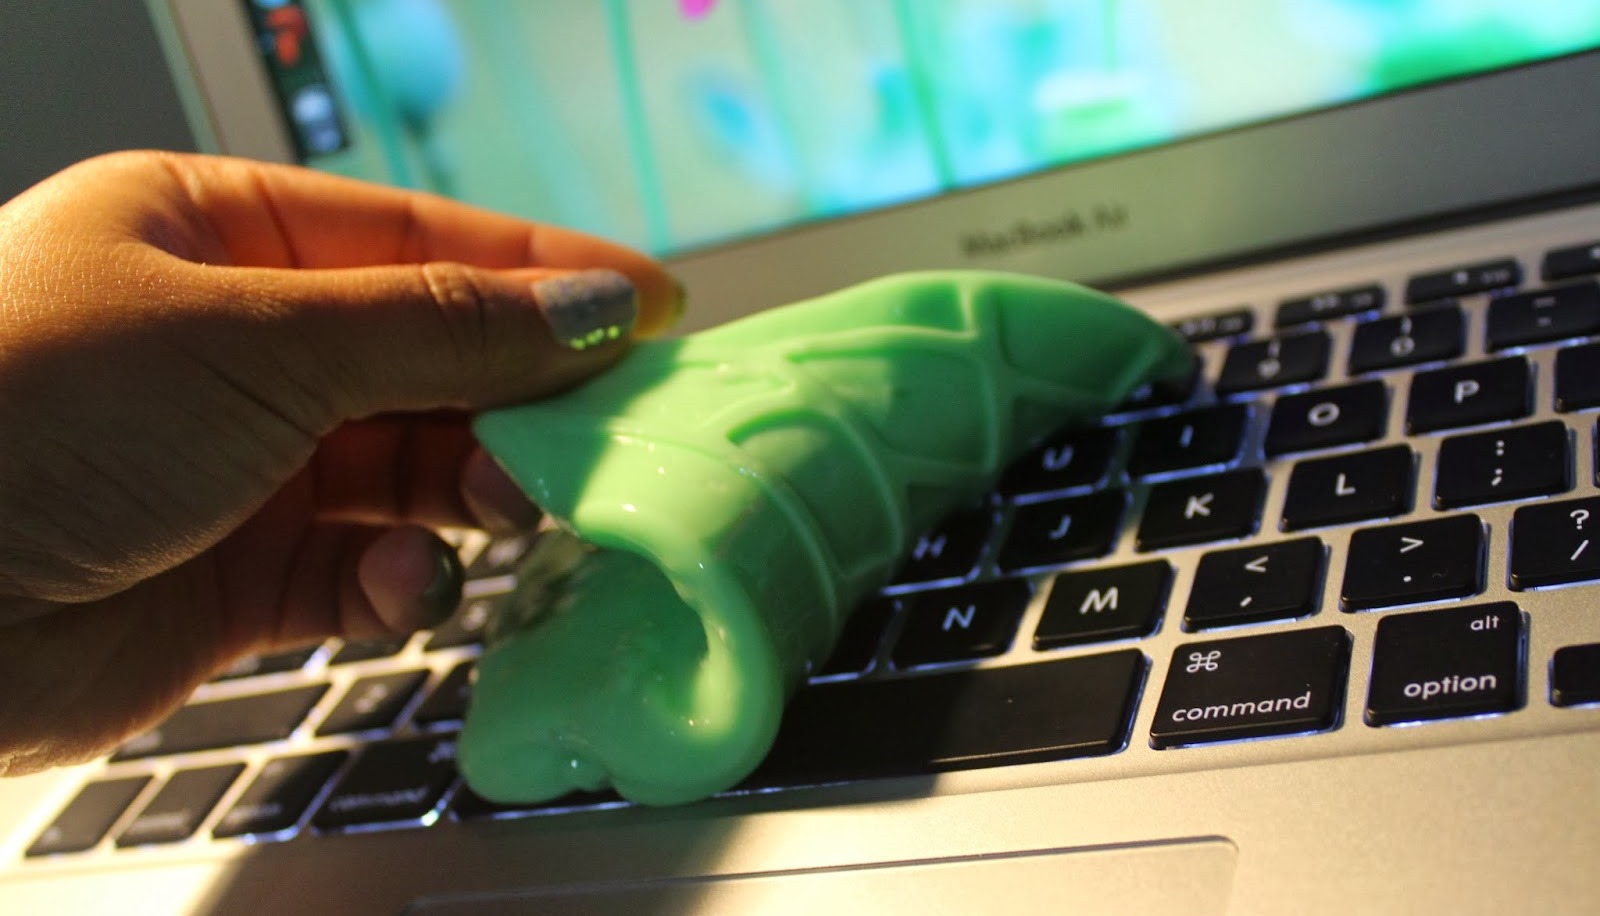 DIY Cleaning Slime To Remove Dirt, Dust And Crumbs Out Of A